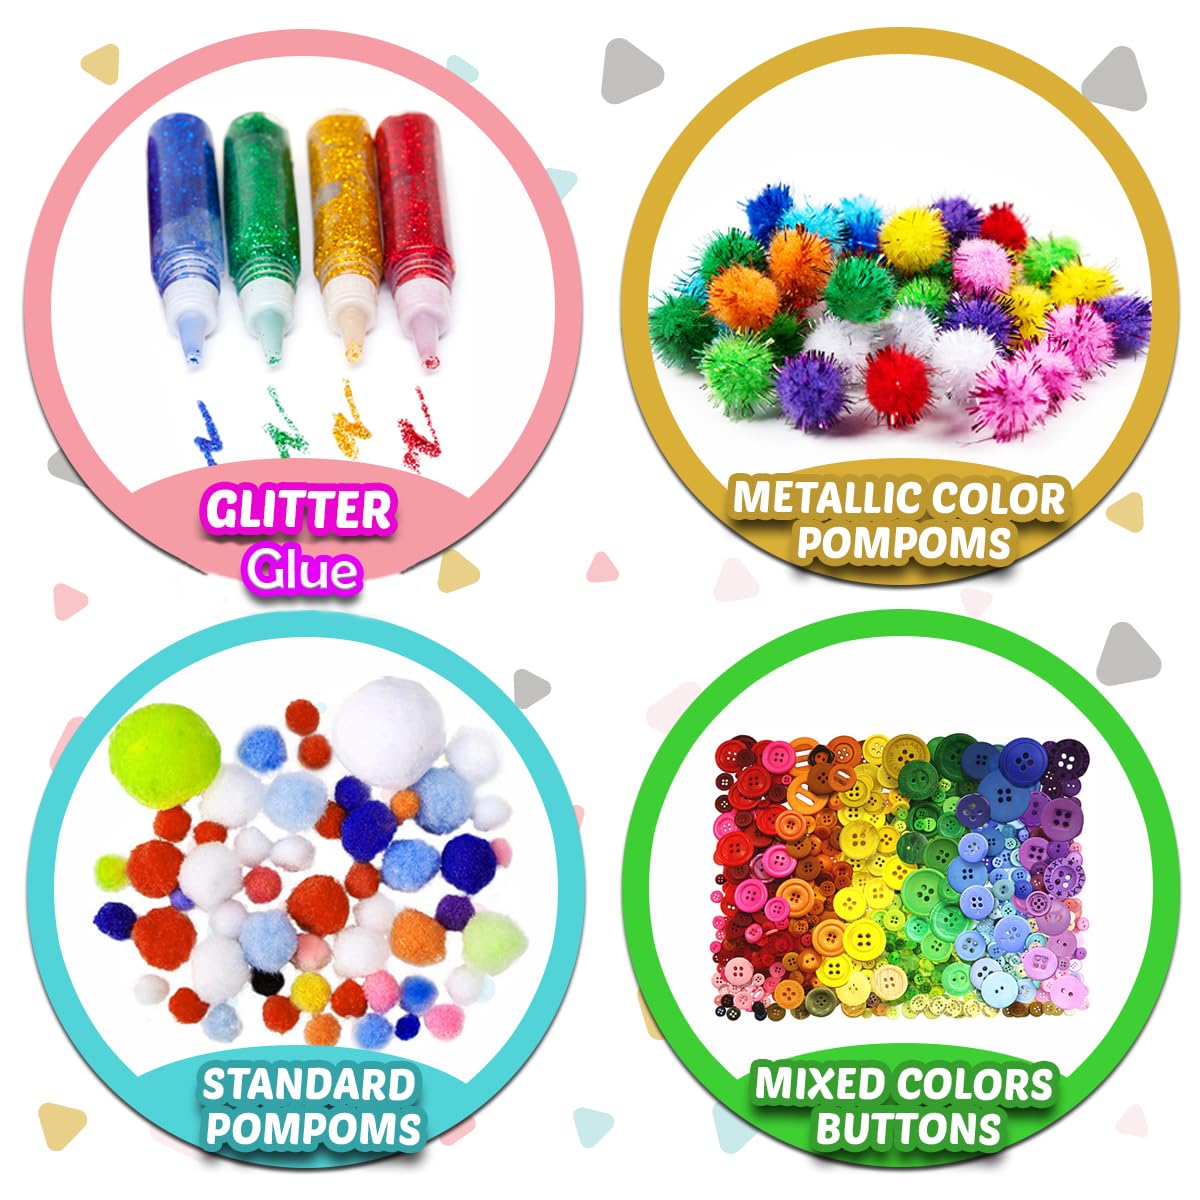 FUNZBO Arts and Crafts Supplies for Kids Crafts - Arts and Crafts for Kids Age 4-8, 4-6, 8-12 with Glitter Glue Stick for Kids, Pipe Cleaners Craft & Craft Tools, DIY School Supplies Kit, Girls Toys